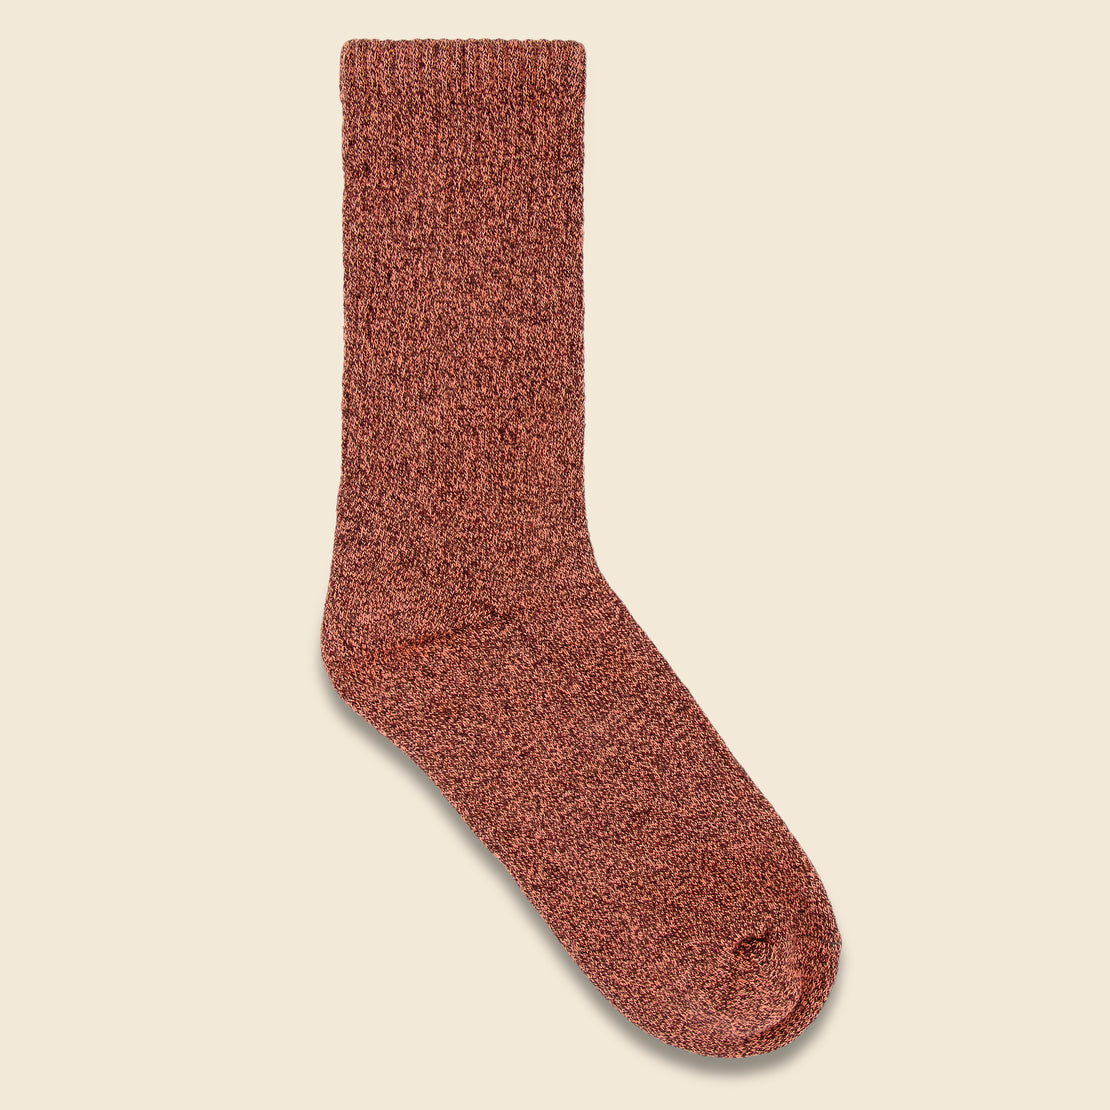 American Trench Recycled Marled Sock - Sienna Marl